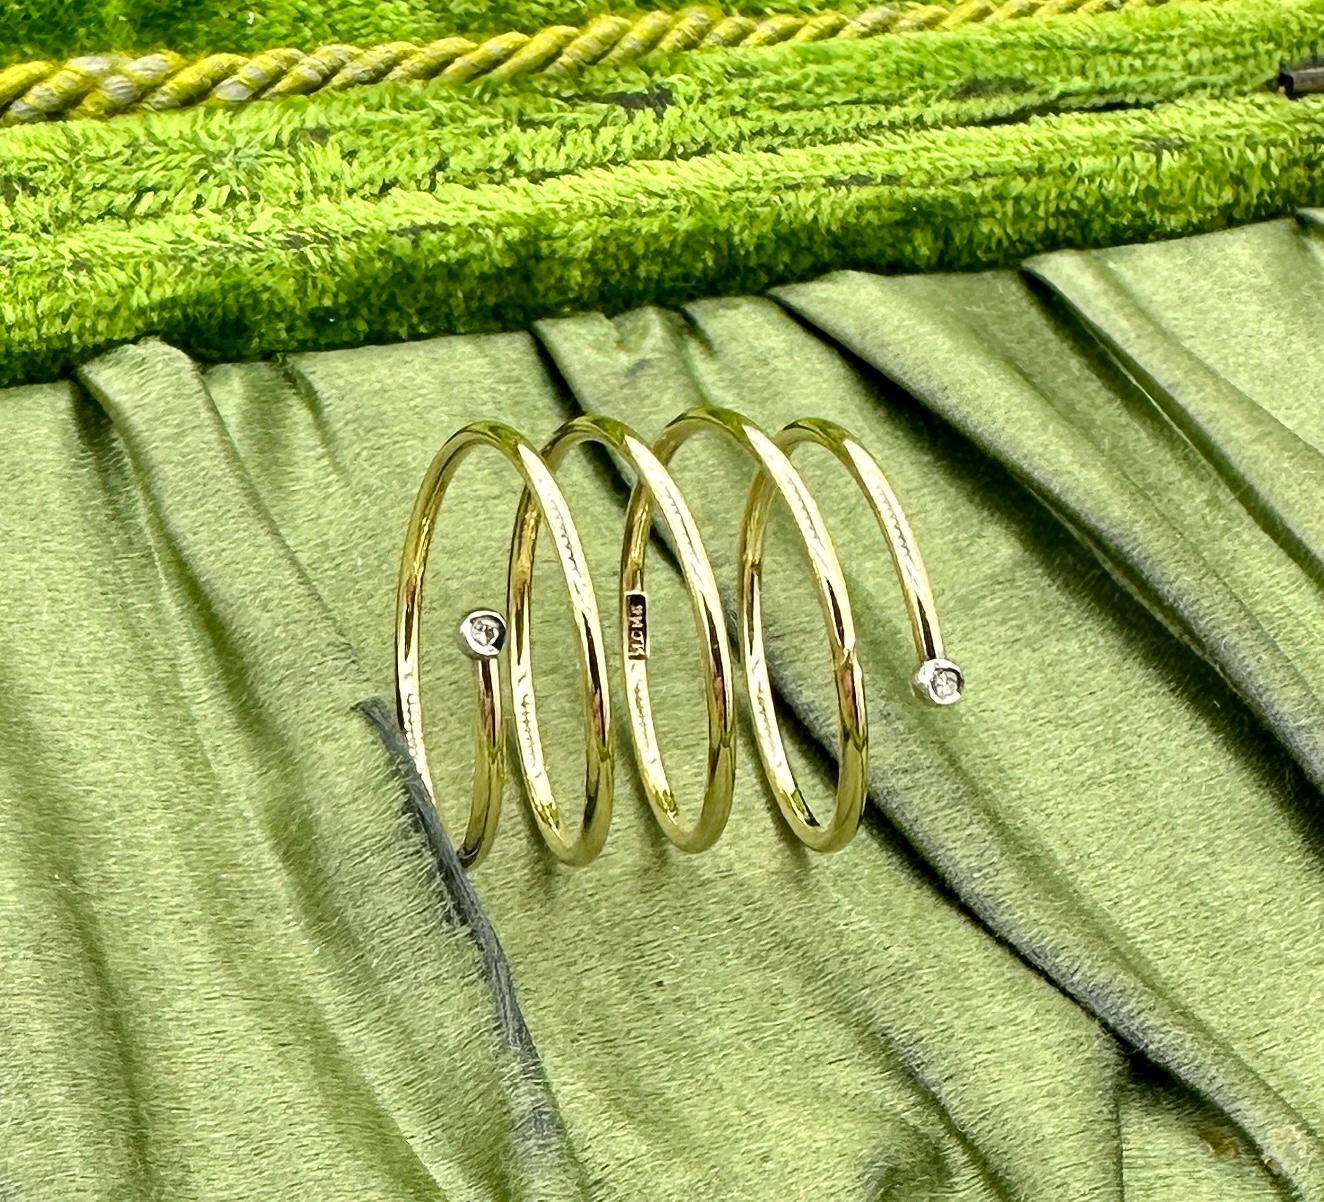 This is a fabulous Diamond Spiral Coil or Snake Ring in 10 Karat Yellow and White Gold.  The wonderful ring spirals around the finger and is set with sparkling diamonds at either end.  The spiral coil design is so delightful!  The spiral is 10 Karat